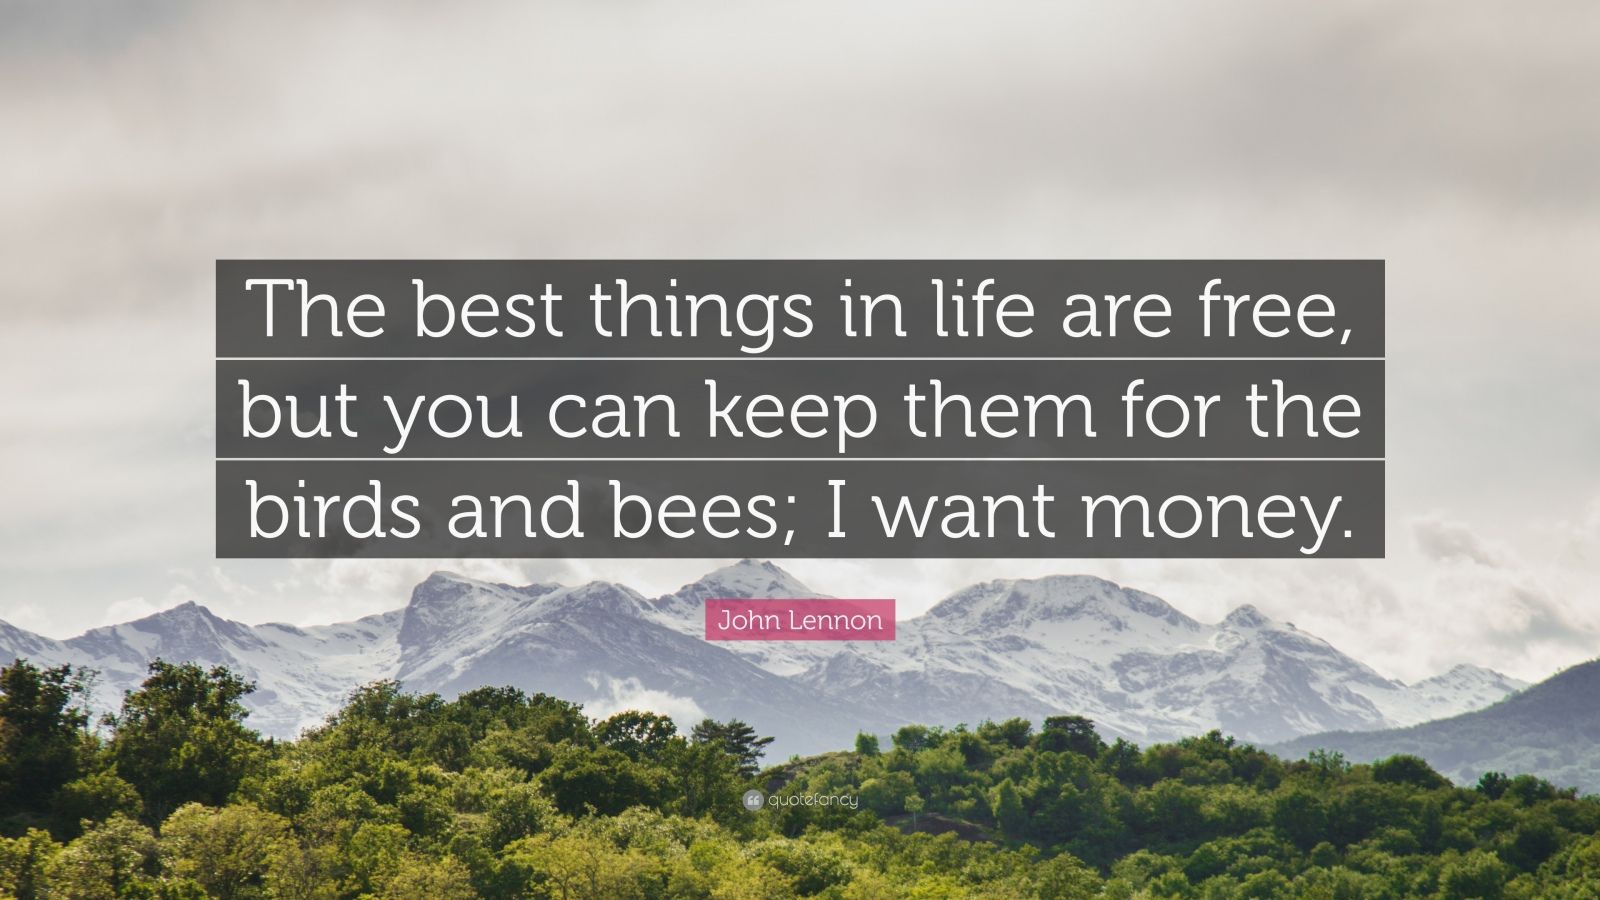 THE BEST THINGS IN LIFE ARE FREE QUOTES –